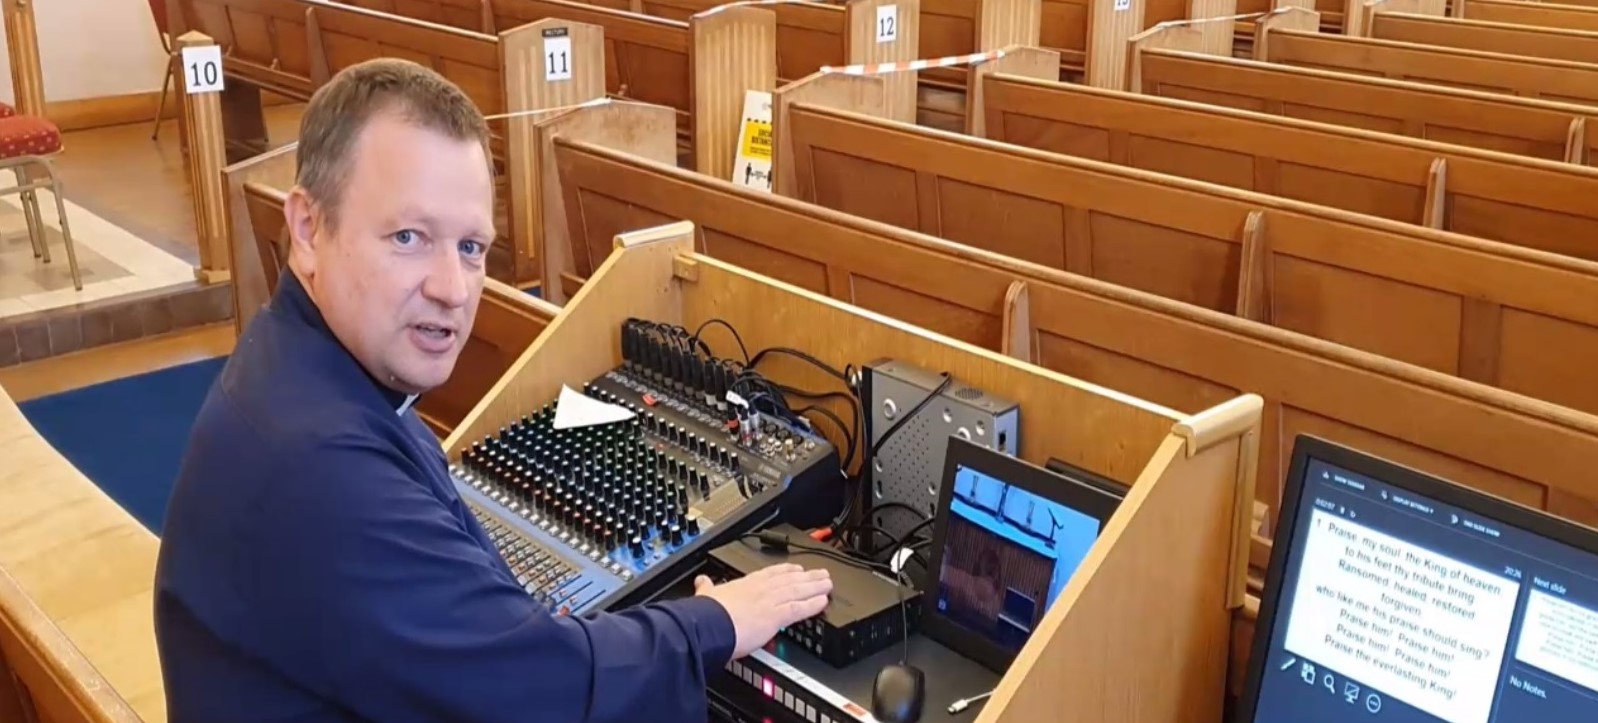 The Revd Andrew Quill discusses the technological side of online church.